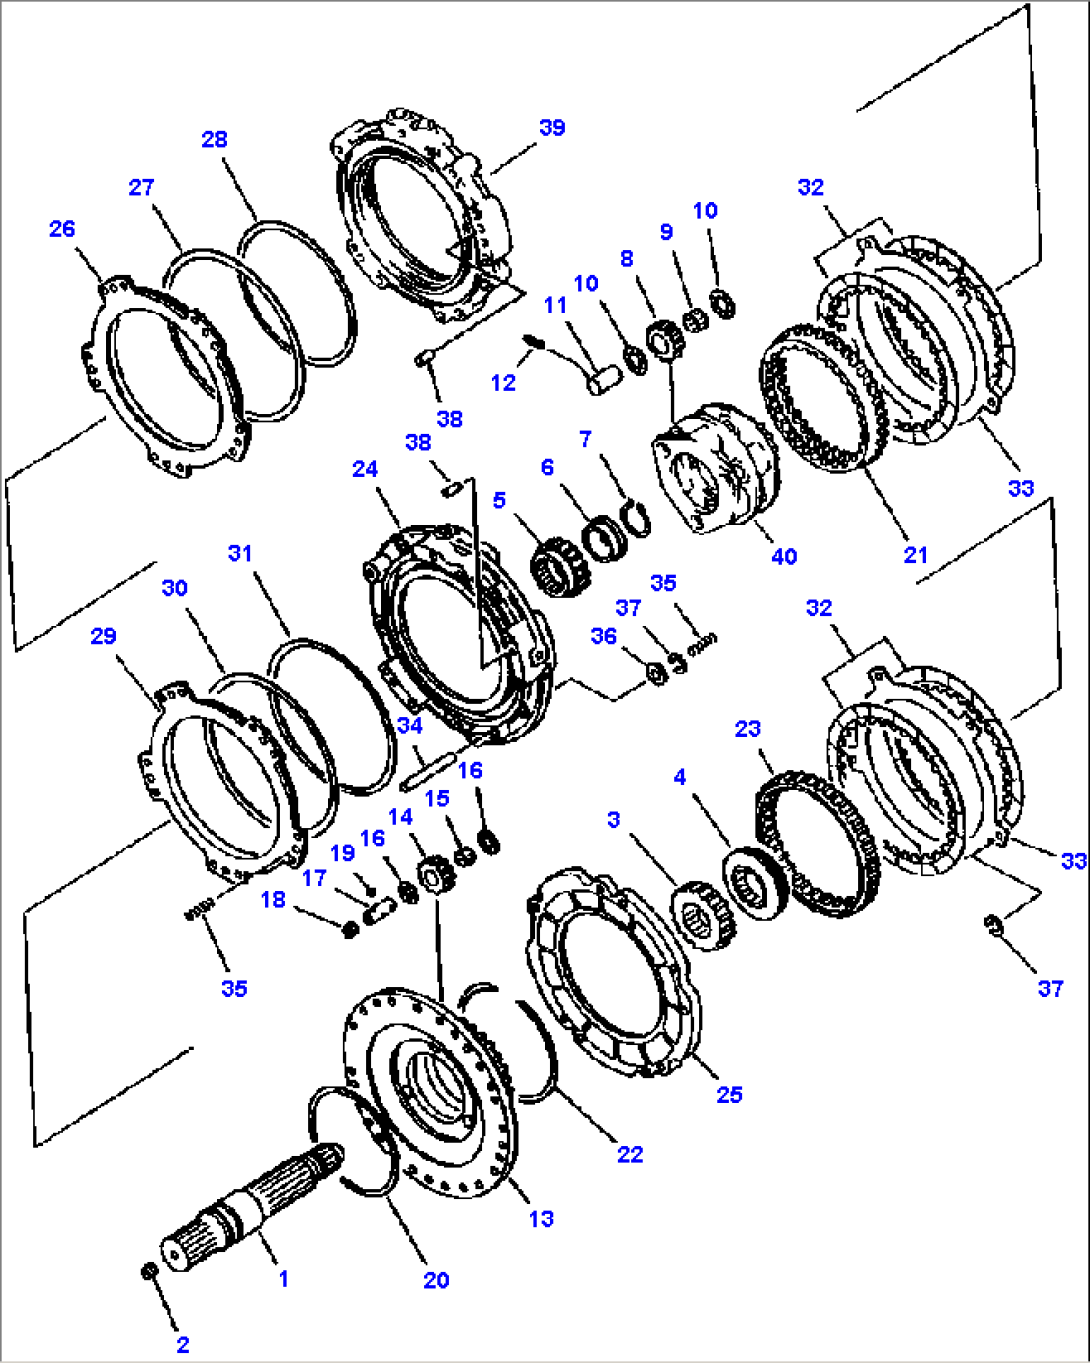 FIG NO. 2513 TRANSMISSION SECOND AND THIRD GEAR CLUTCH